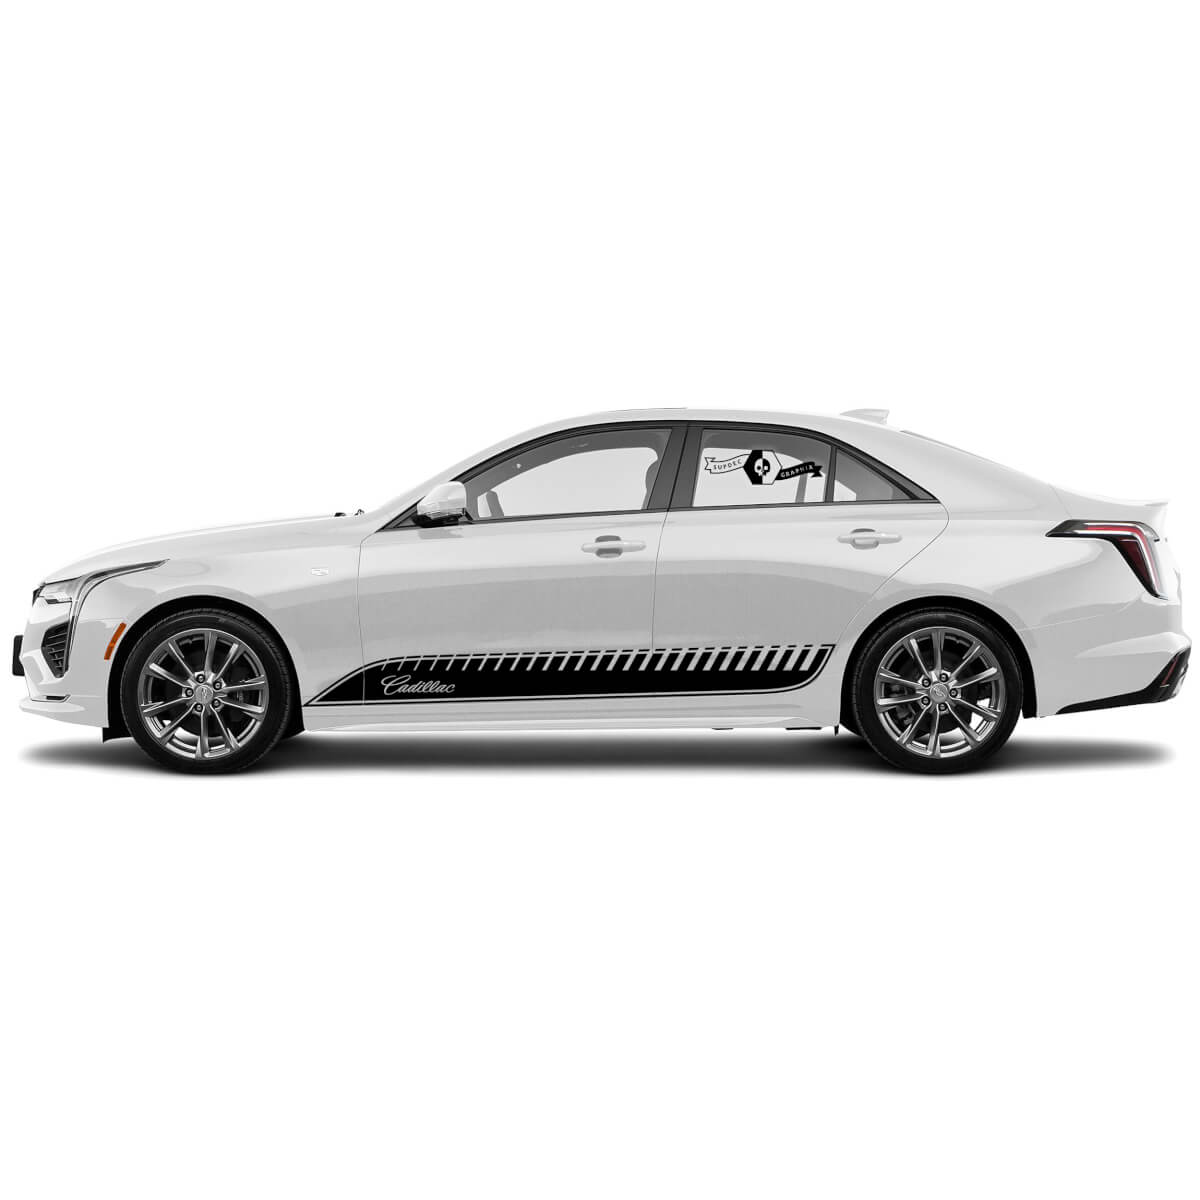 2 New Decal Sticker Stylish Doors Accent Trim Linee di confine Pockmarked Wrap Vinyl Decal per Cadillac CT4